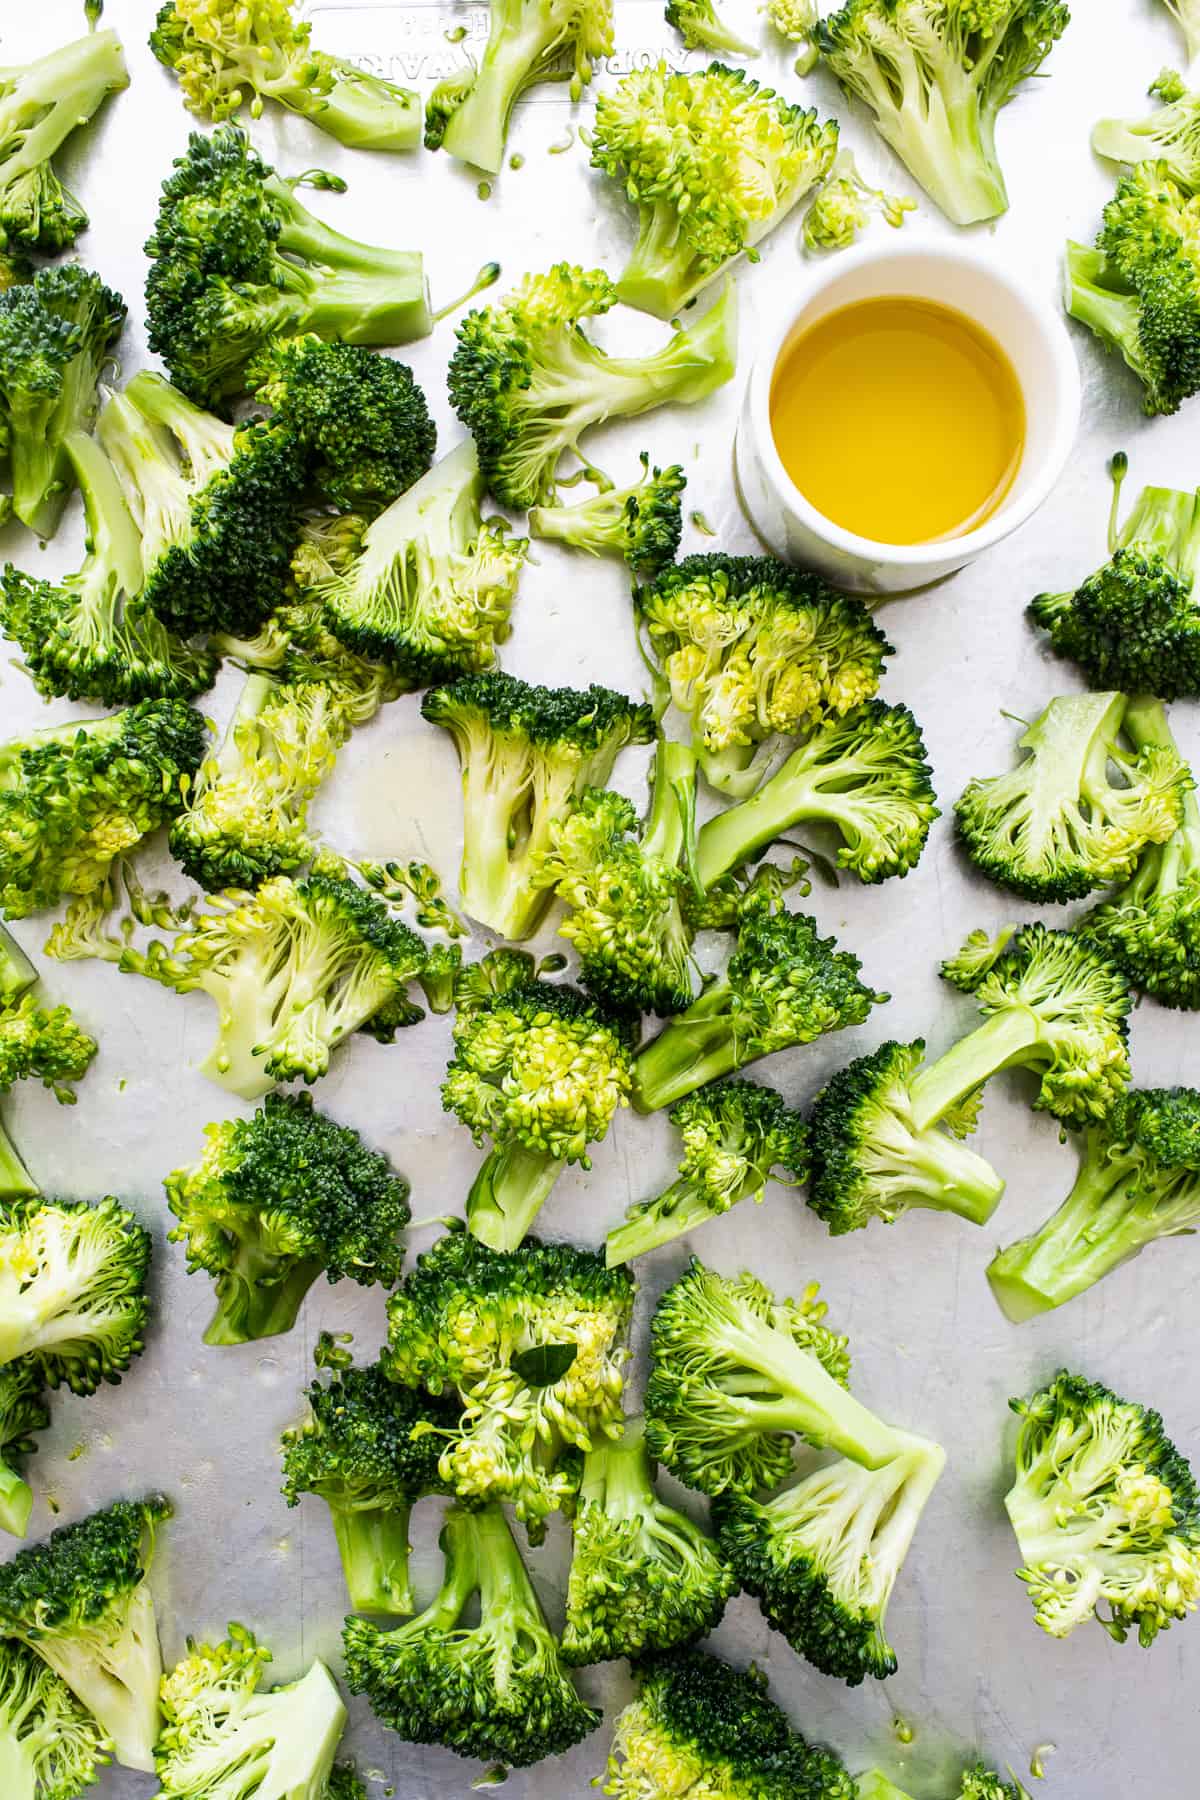 Broccoli florets and a bowl of olive oil.